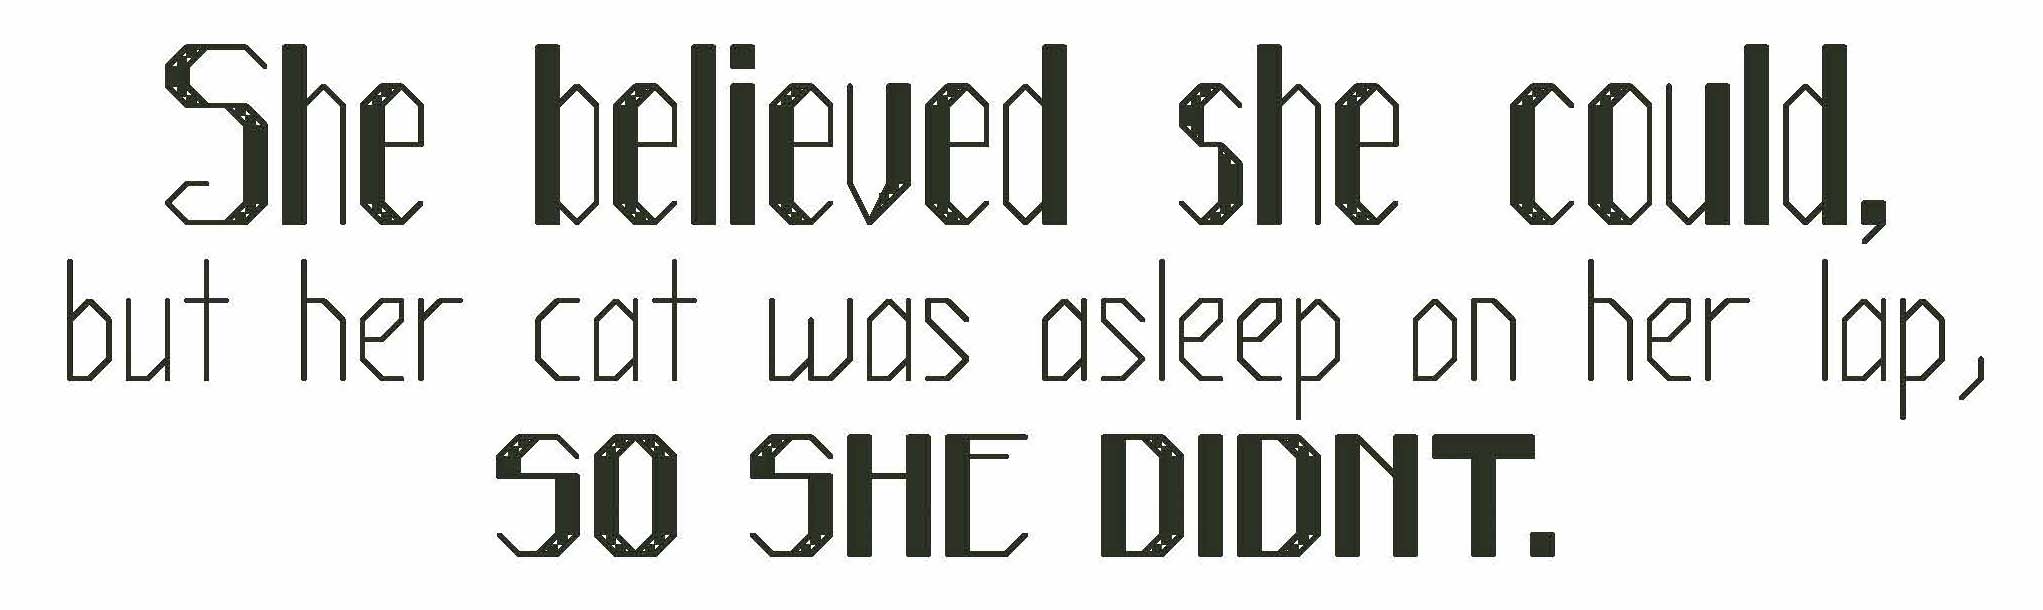 She Believed She Could - Phrase Pattern